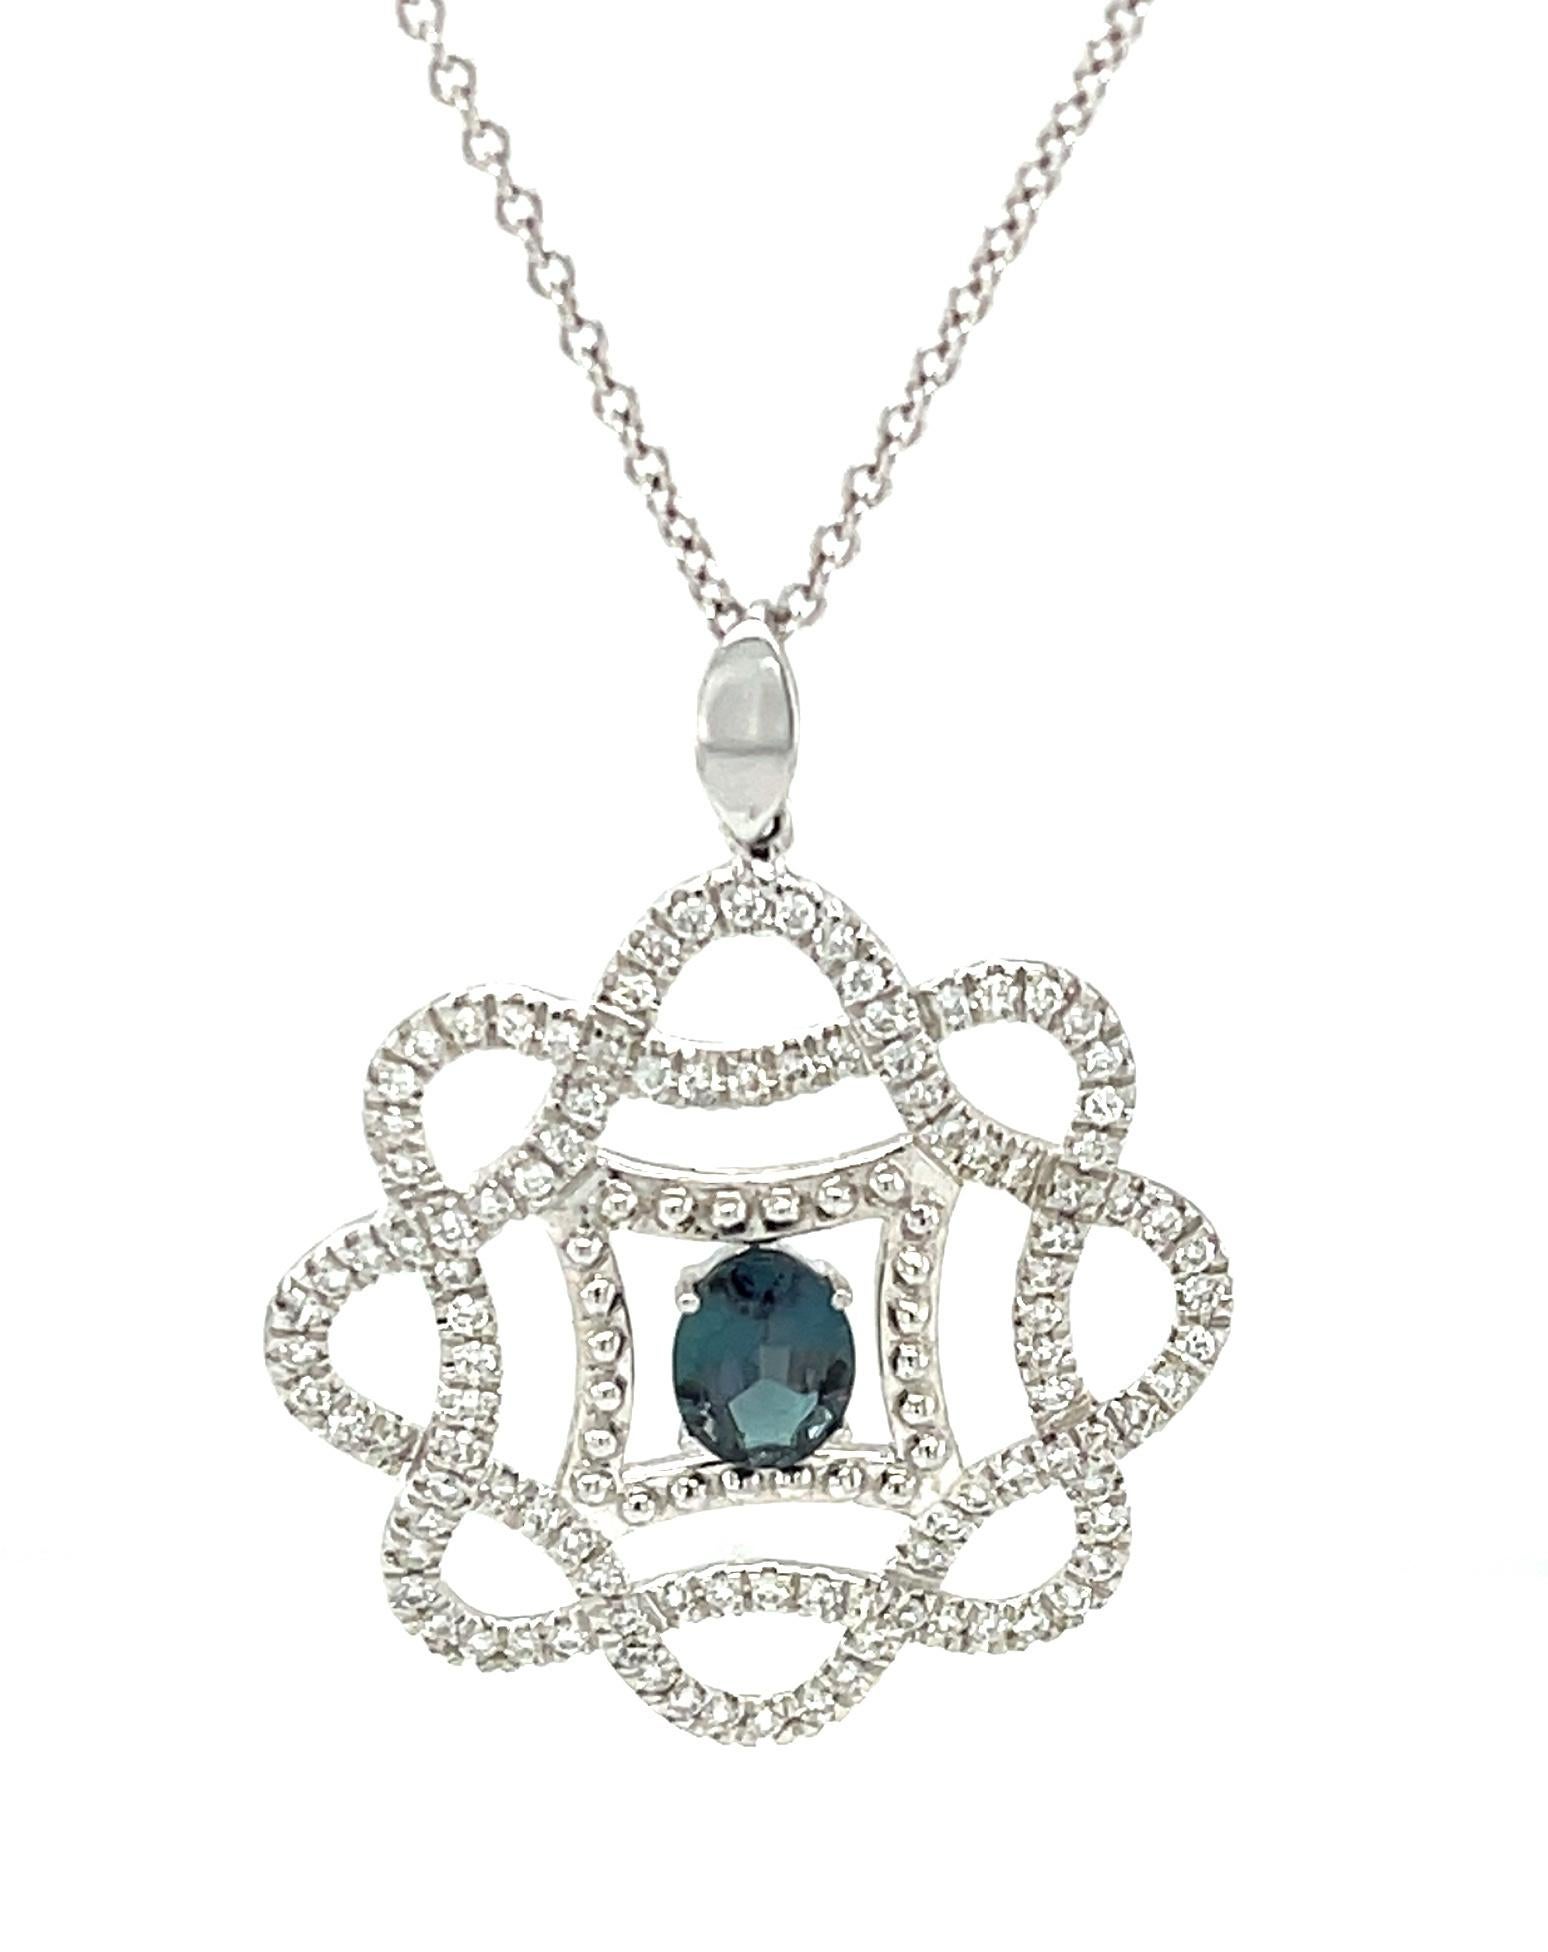 This exquisite necklace features a stunning .53 carat natural alexandrite with gorgeous color change! Alexandrite, June's birthstone, is among the rarest of Earth's gems, prized for its ability to change from teal blue-green in fluorescent, or day